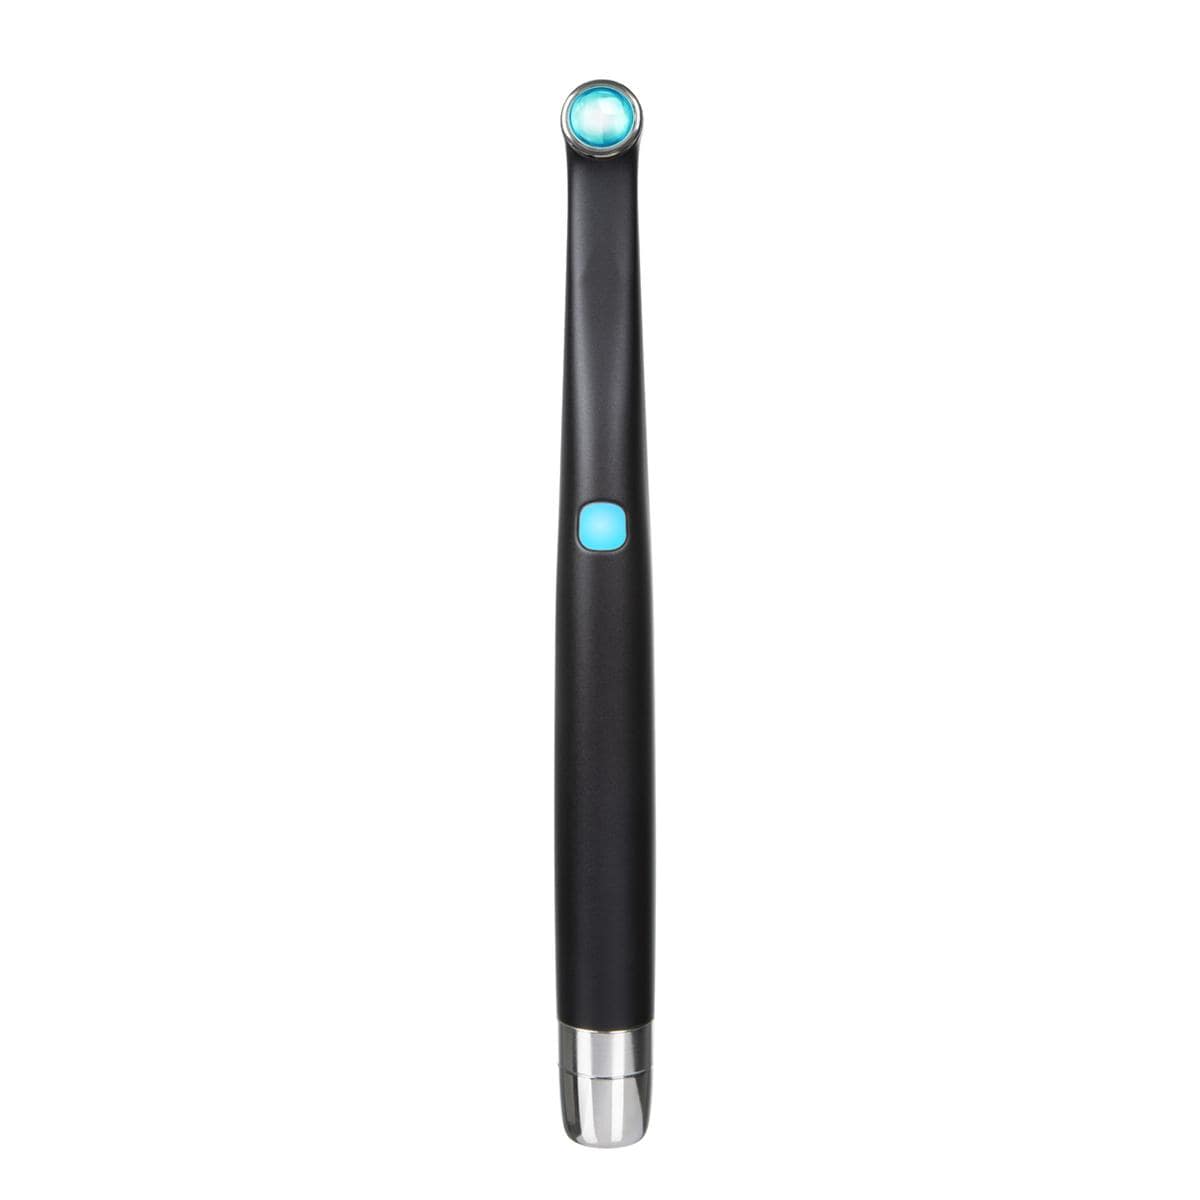 VALO X LED Curing Light - UP 5973